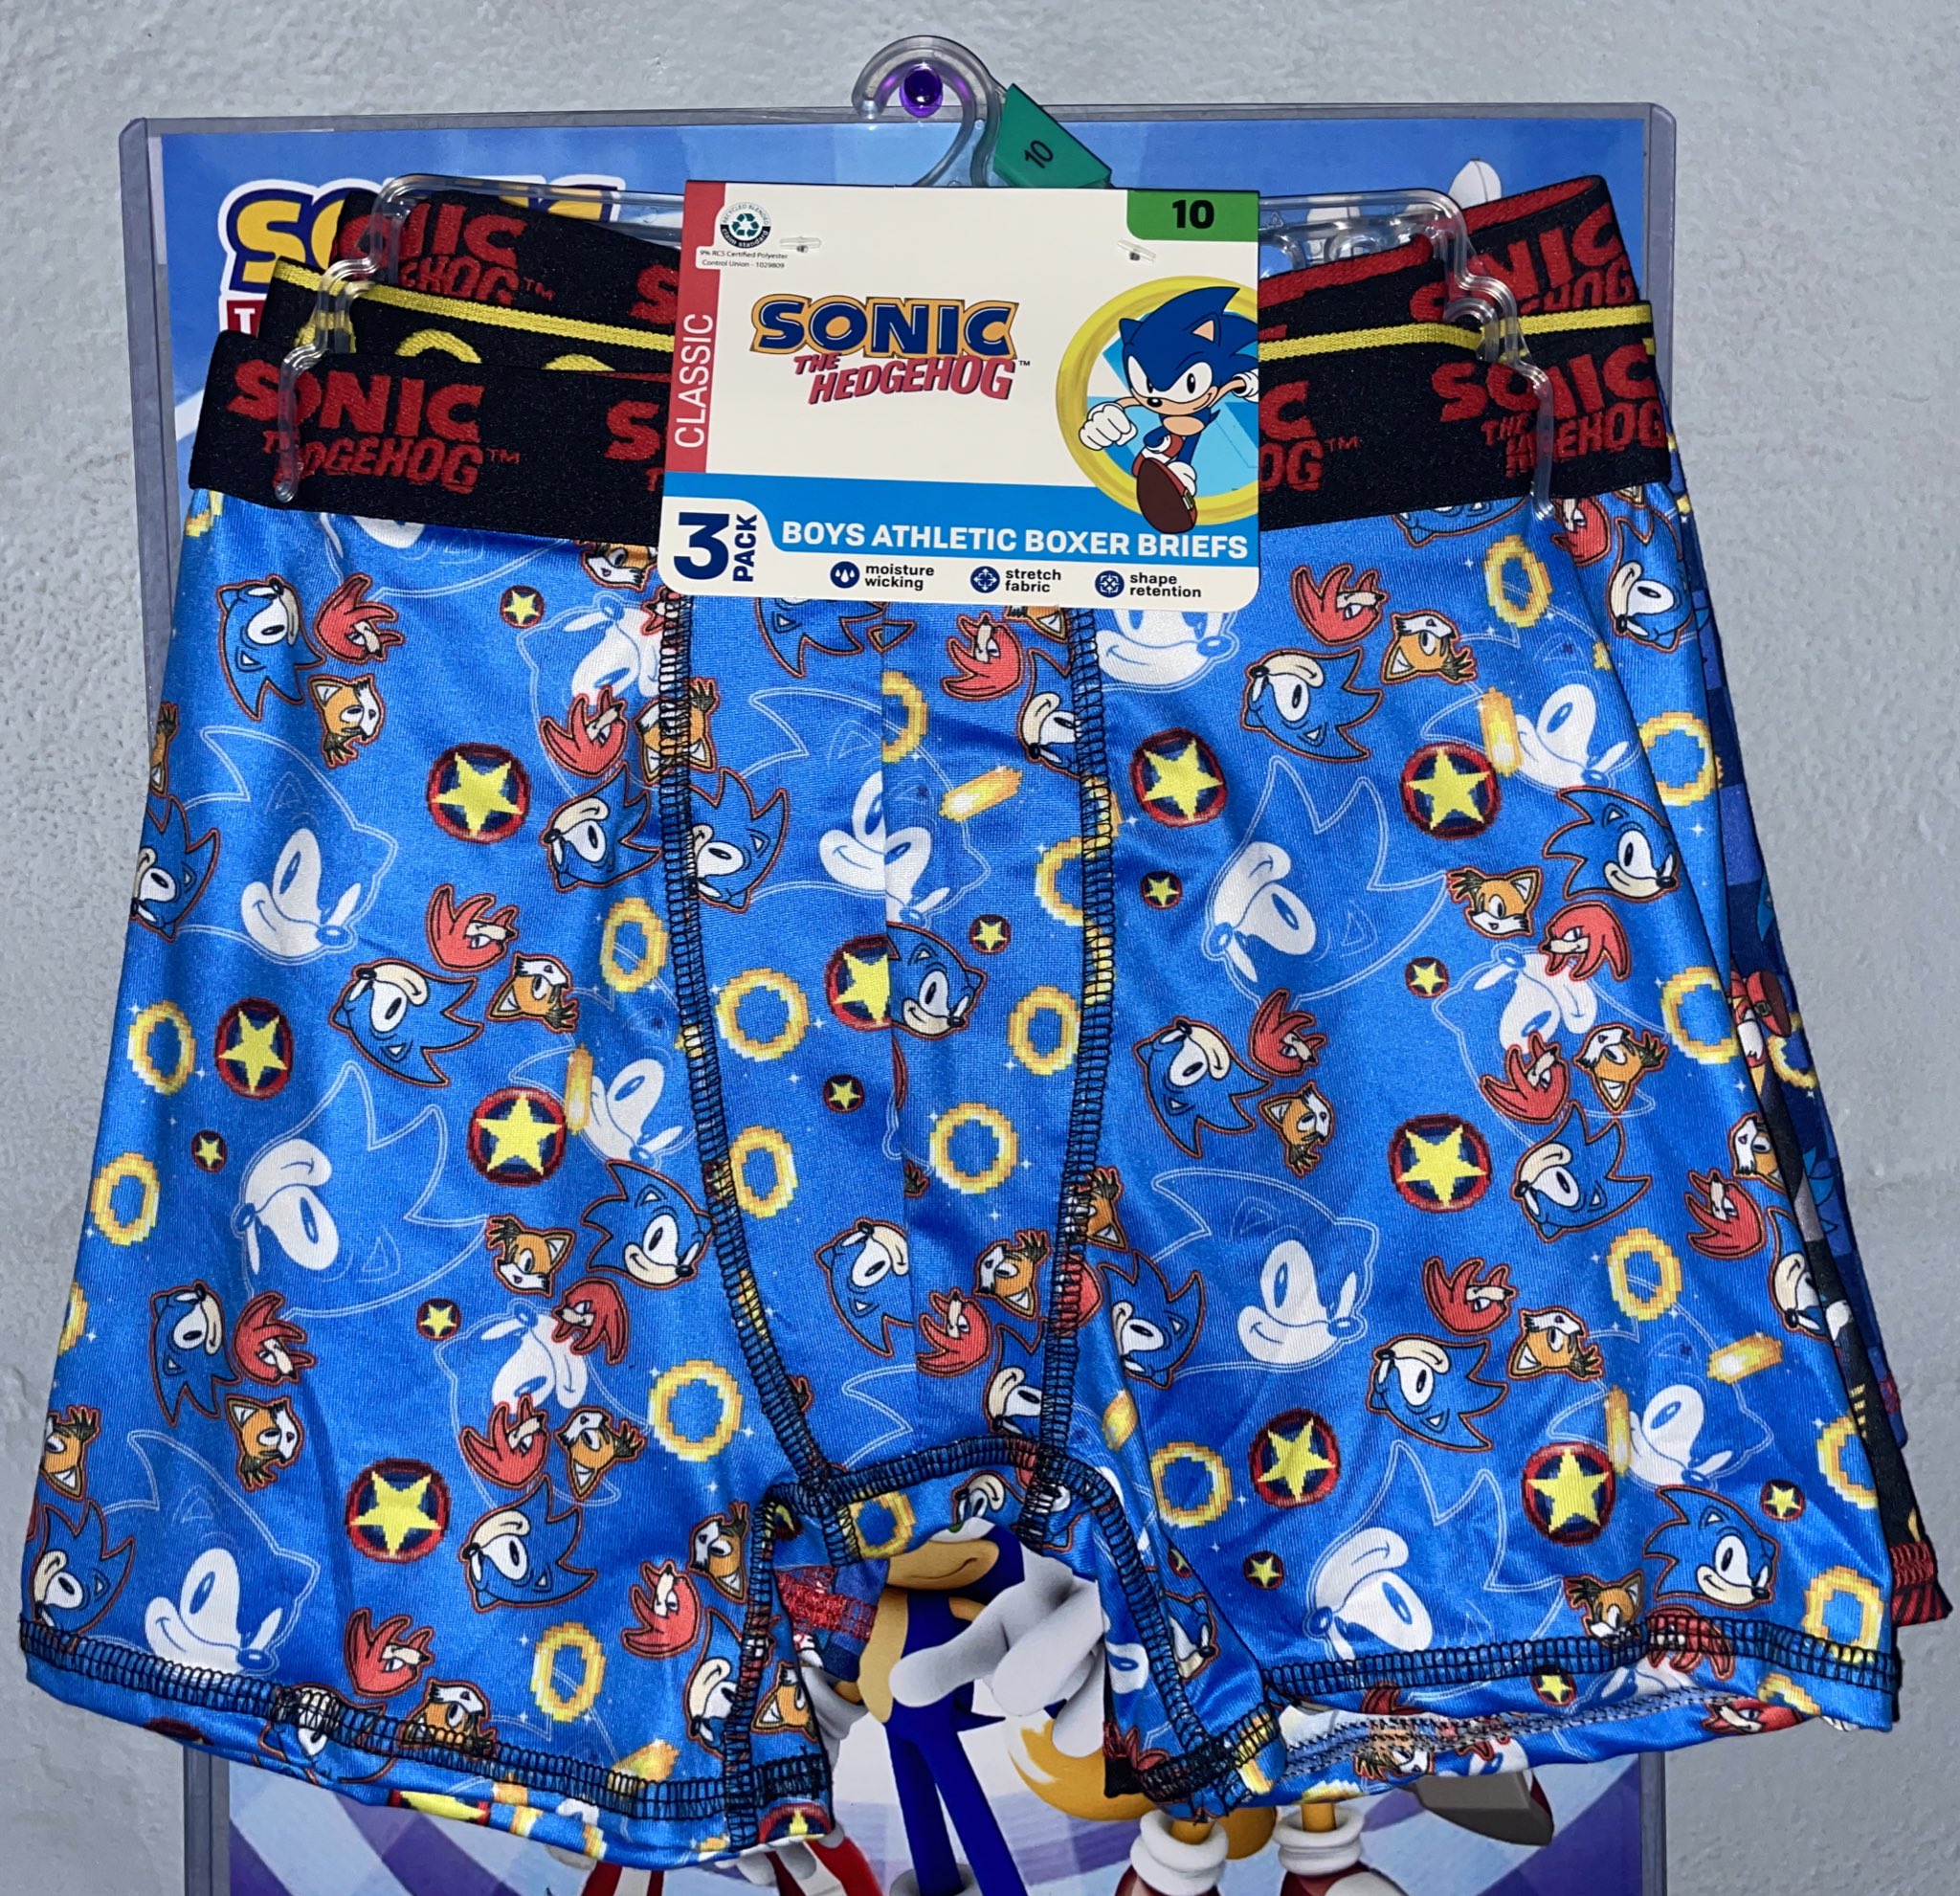 SonicStyleBlog on X: Available now is a new 3 pack of Sonic the Hedgehog  athletic boxers for Boys, featuring 3 unique designs featuring Sonic, Tails  and Knuckles! Available at Burlingtons sizes 4-10